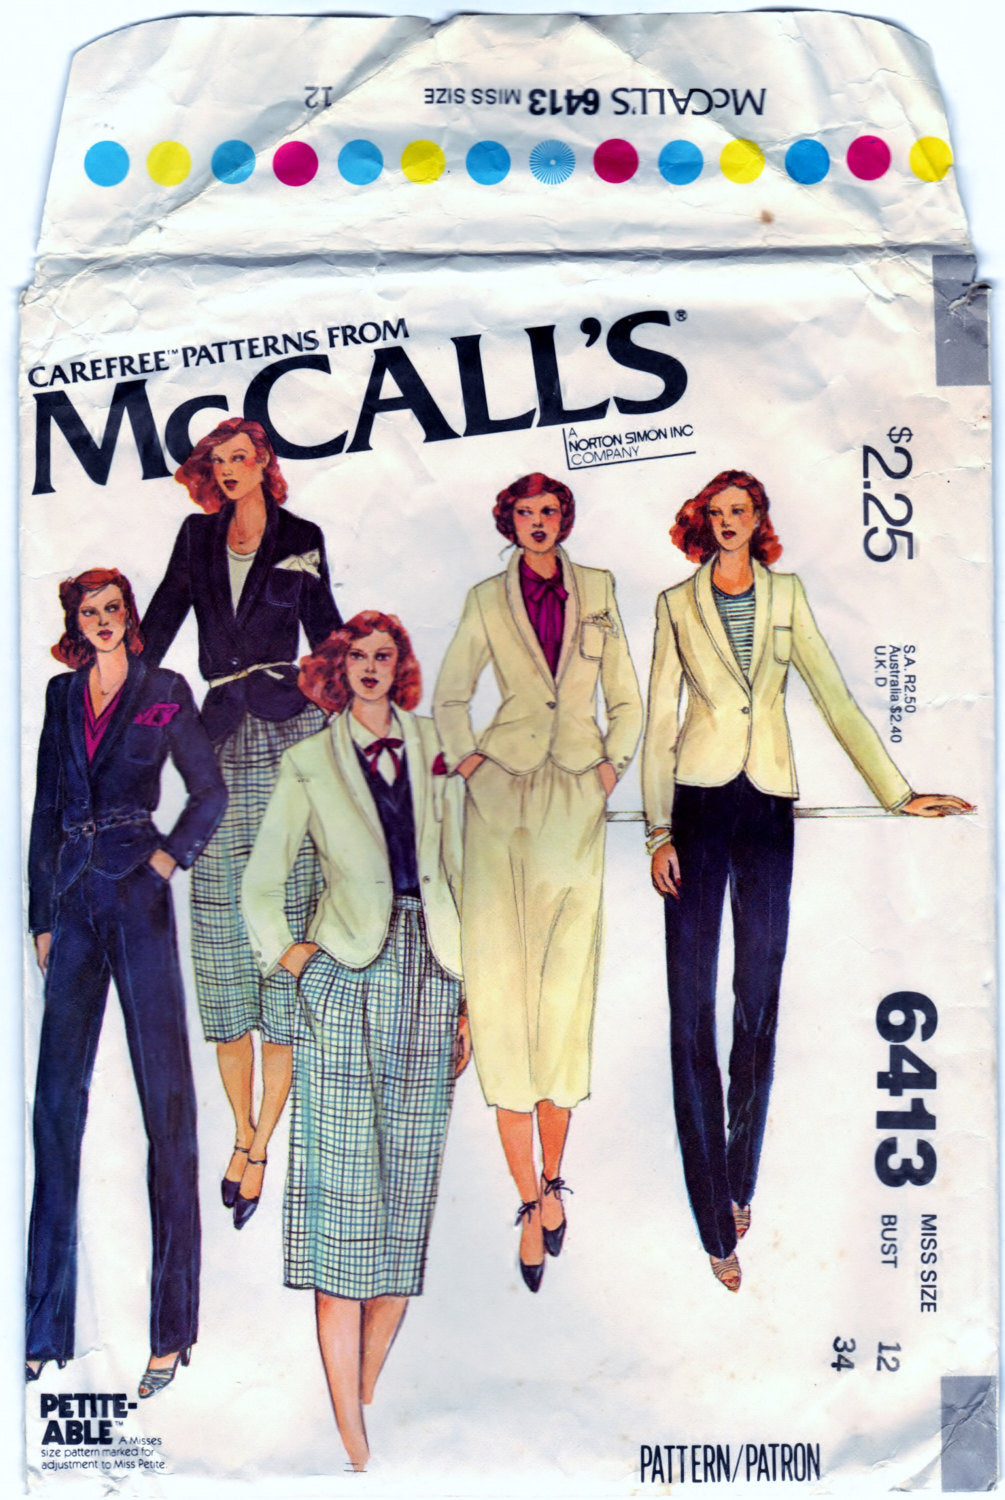 McCalls 6413 Pattern Vintage Misses Jacket, Skirt, and Trousers